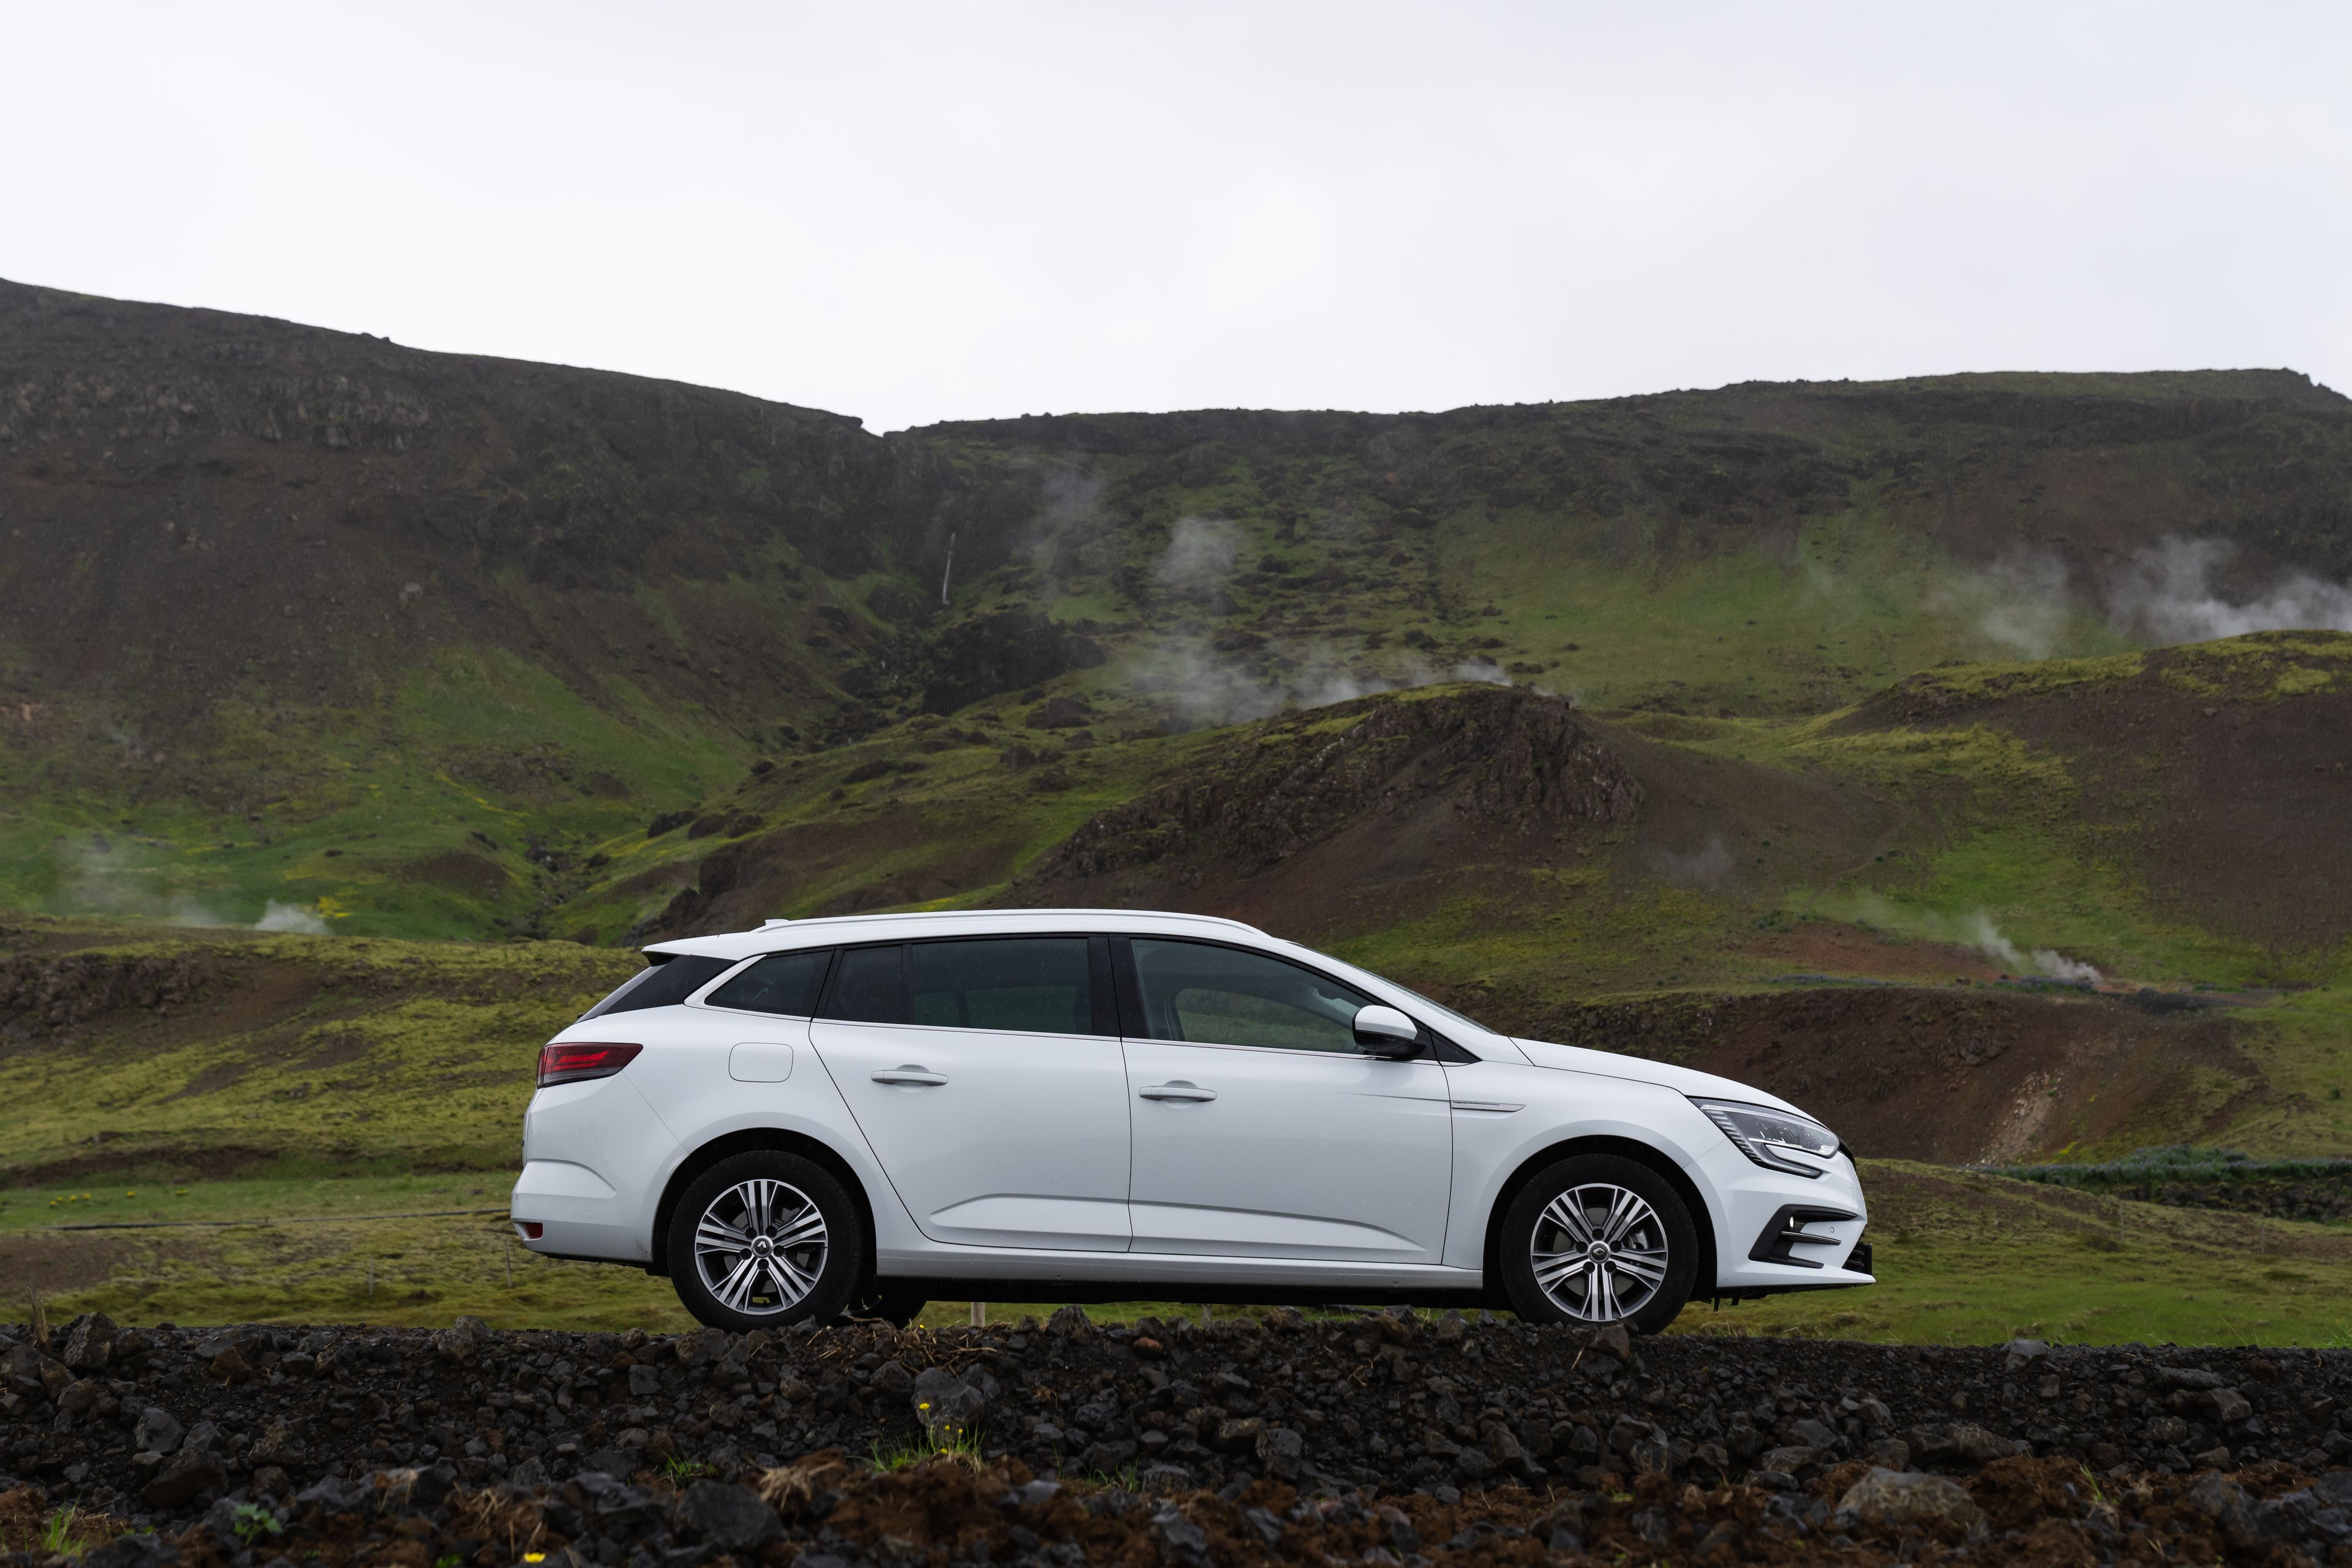 A stylish Renault Megane, a comfortable choice for car rental in Iceland, set against a stunning Icelandic backdrop